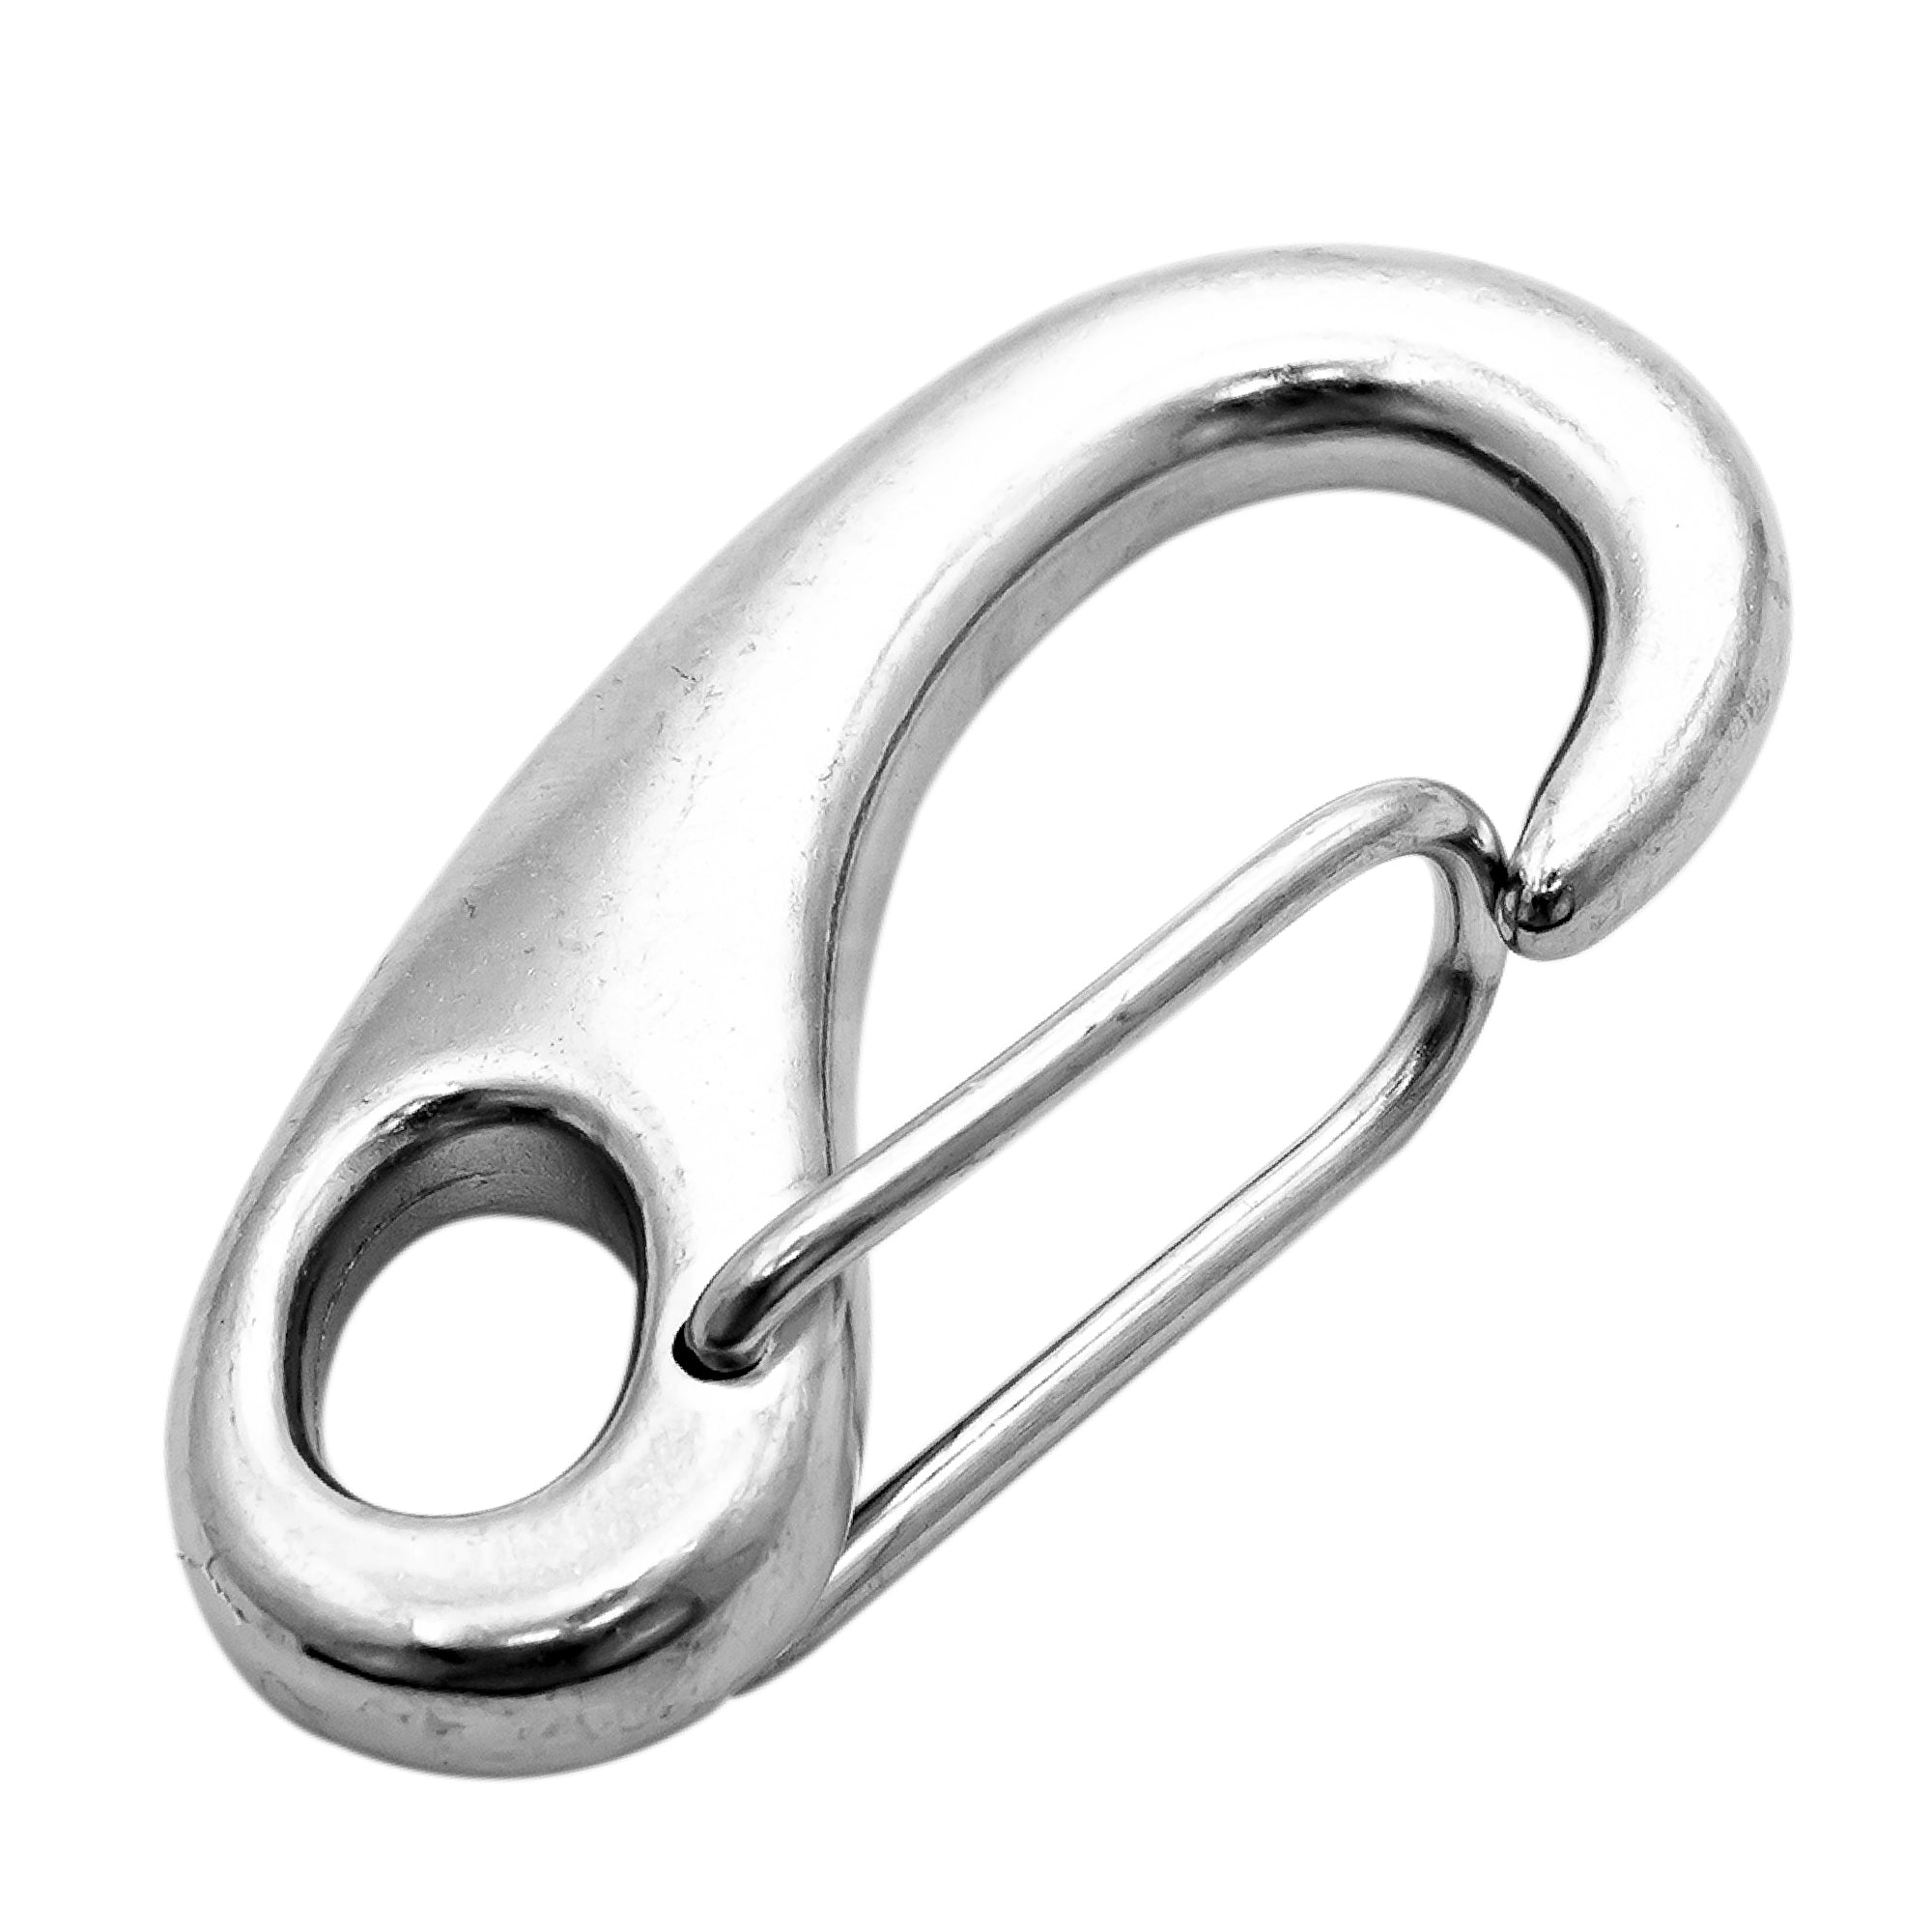 Spring Gate Snap Hook, 2-3/4" Stainless Steel - FO462